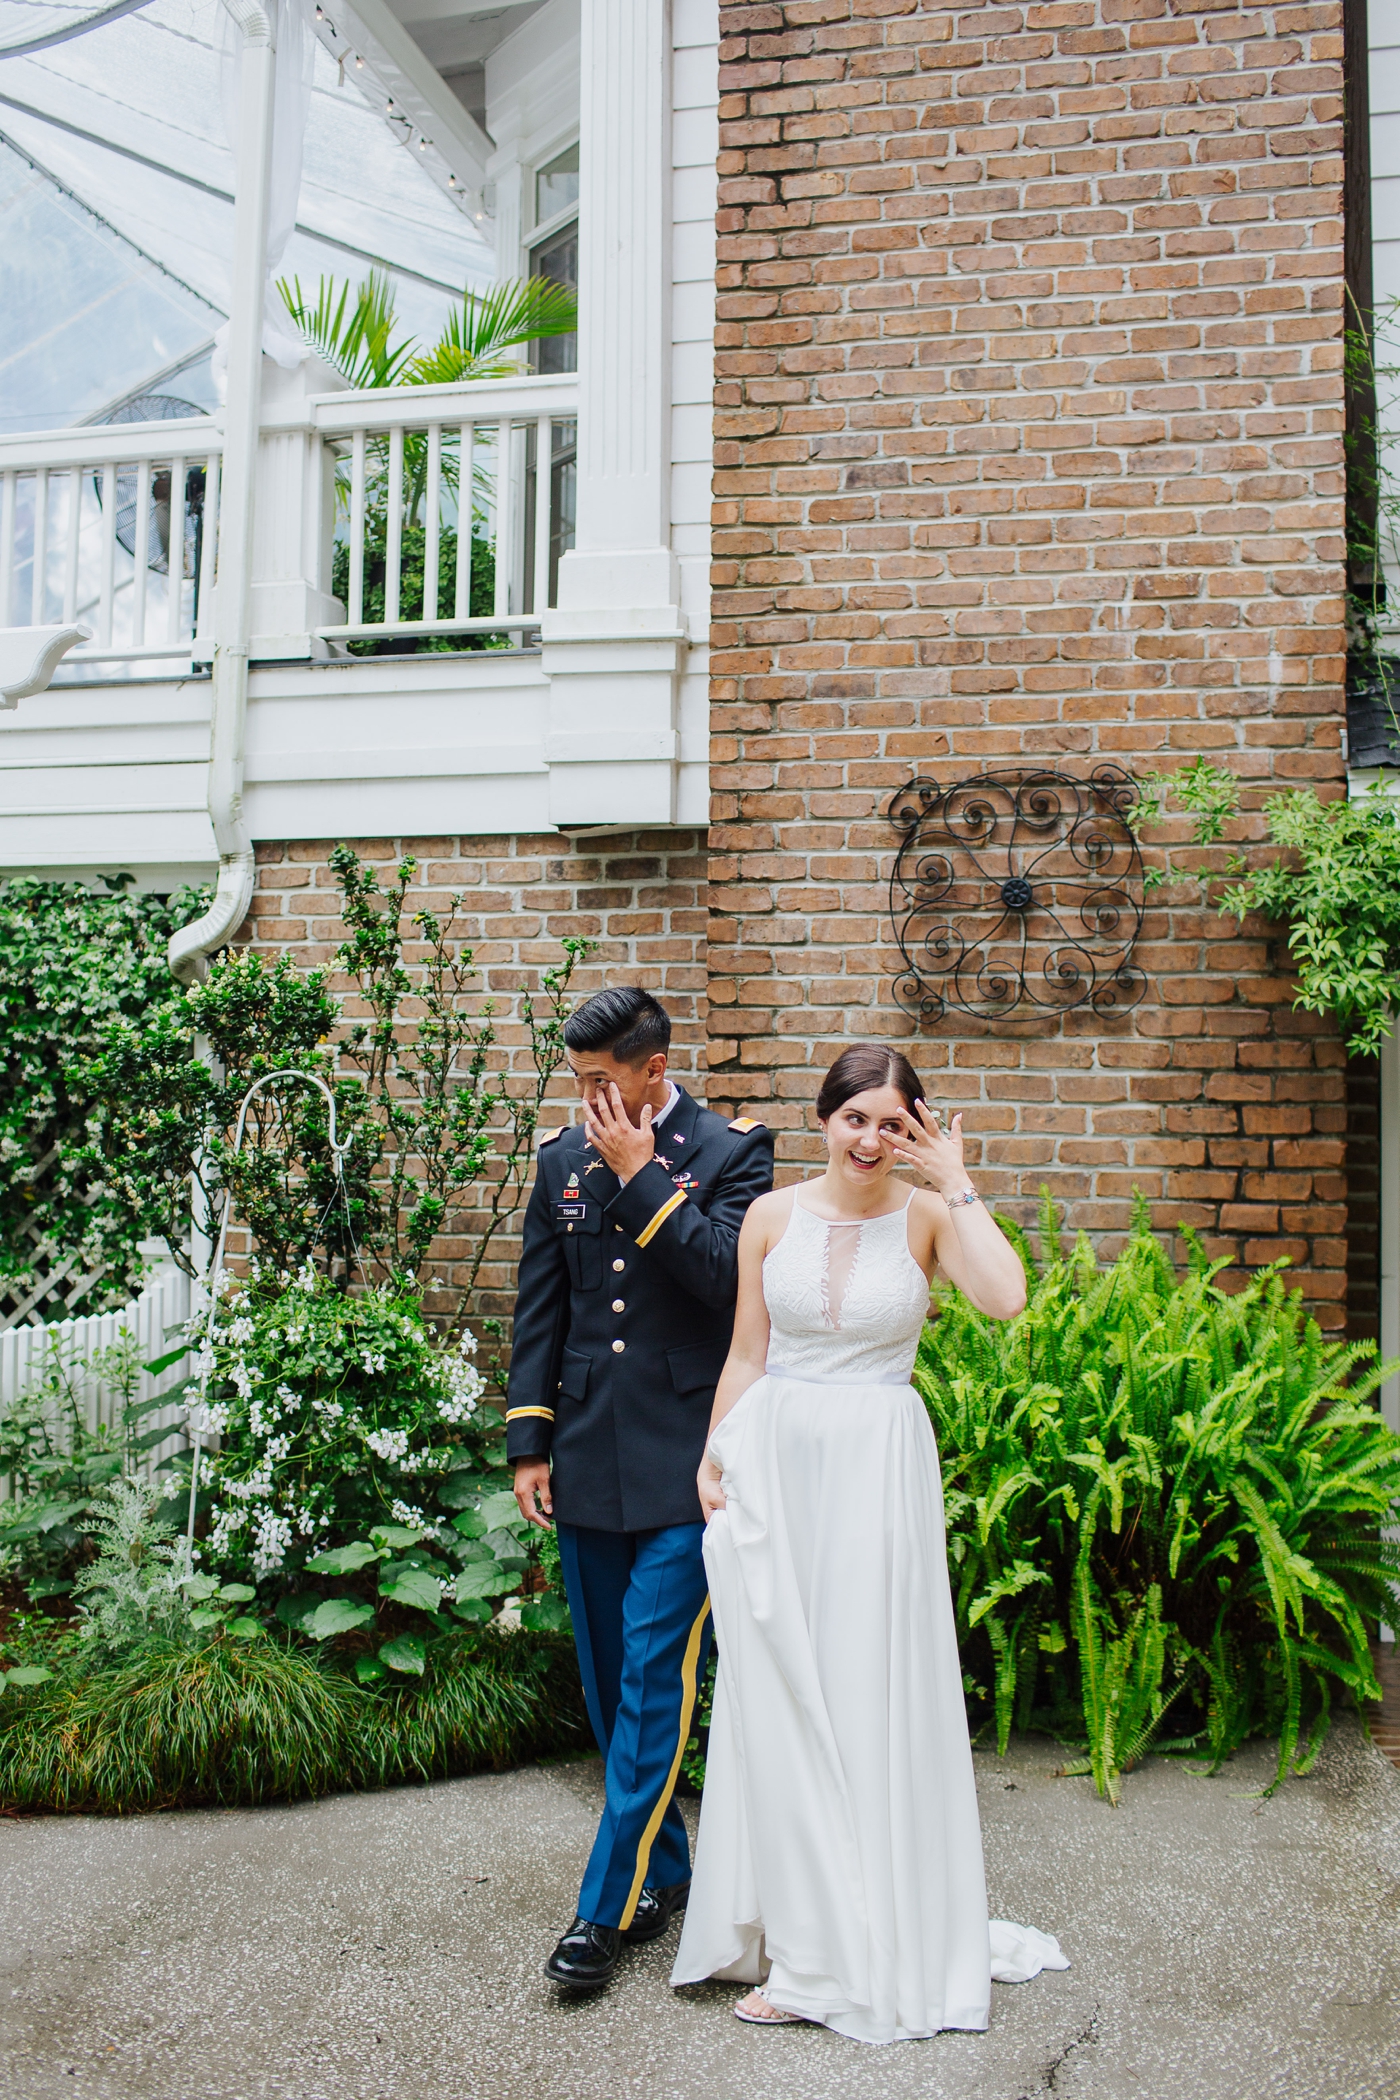 Bride and groom first look at The Mackey House in Savannah